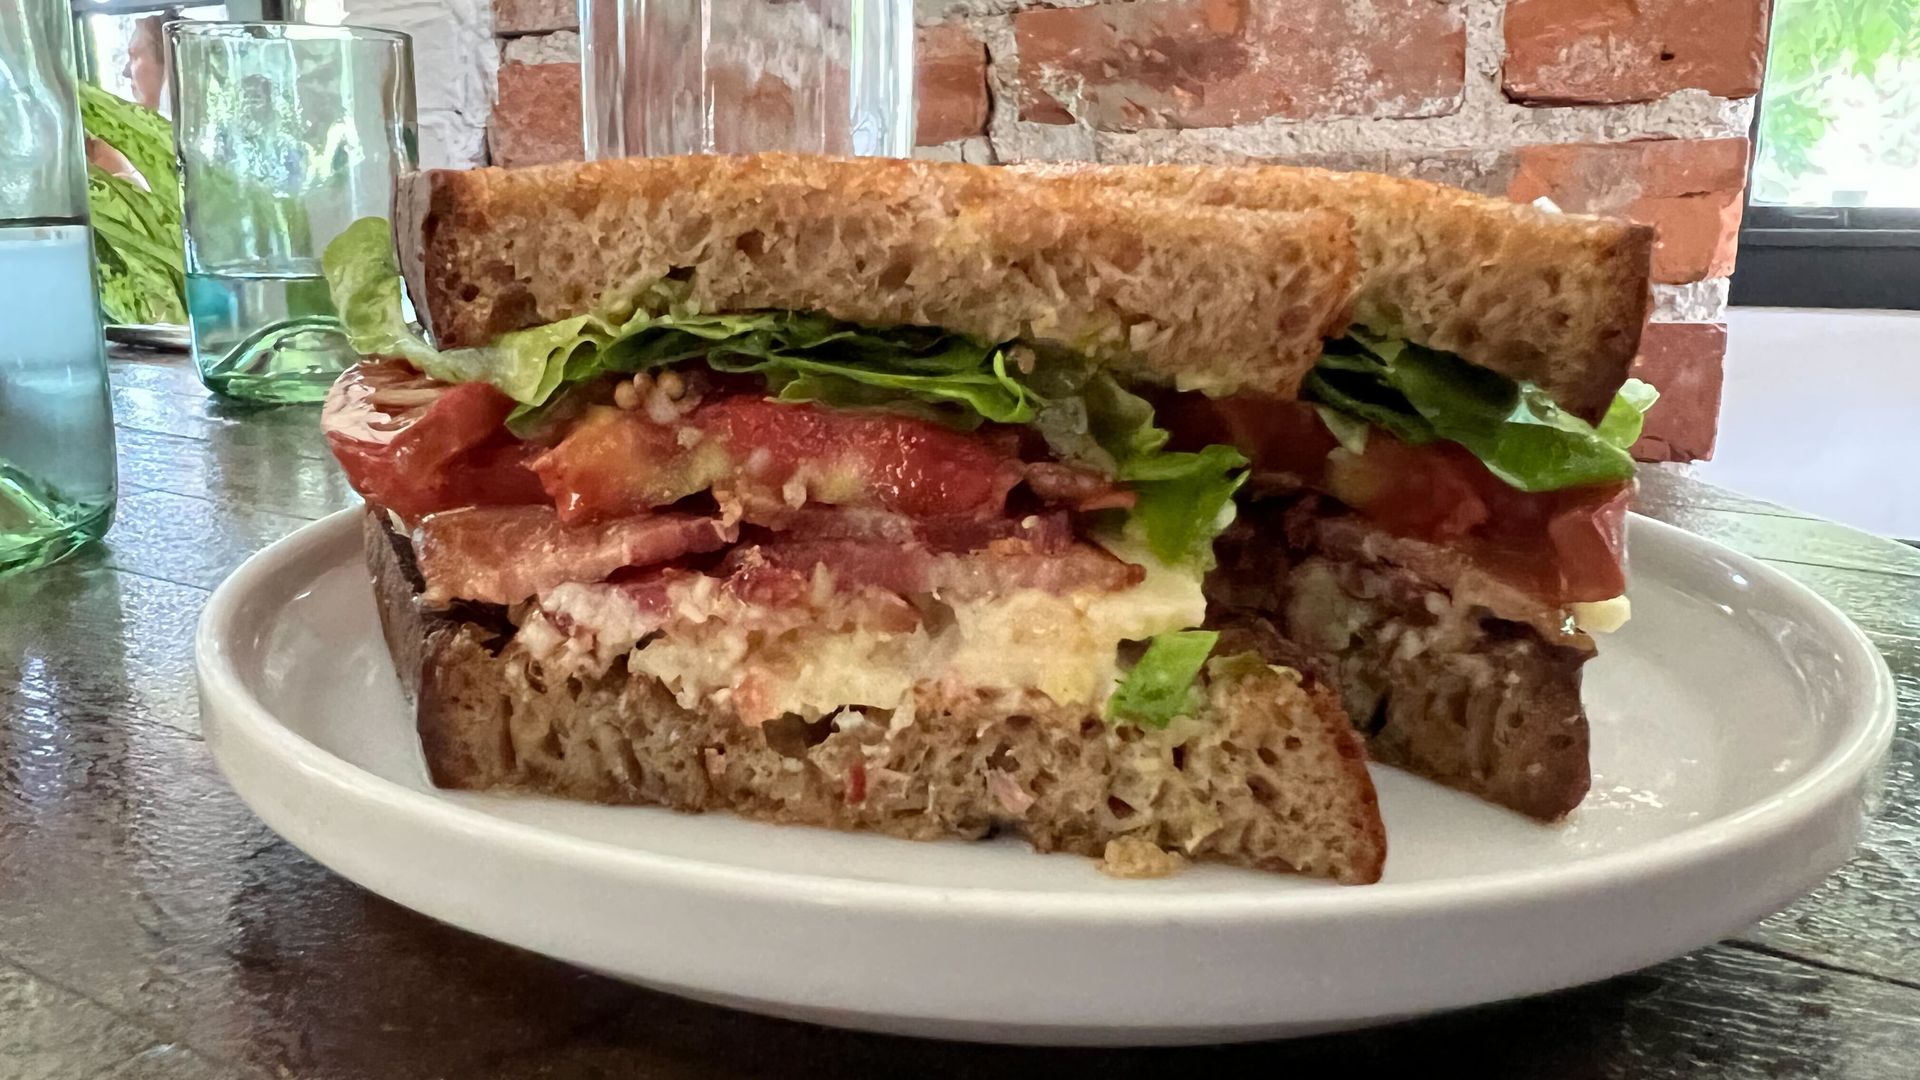 A BLT sandwich sliced in half on a plate.